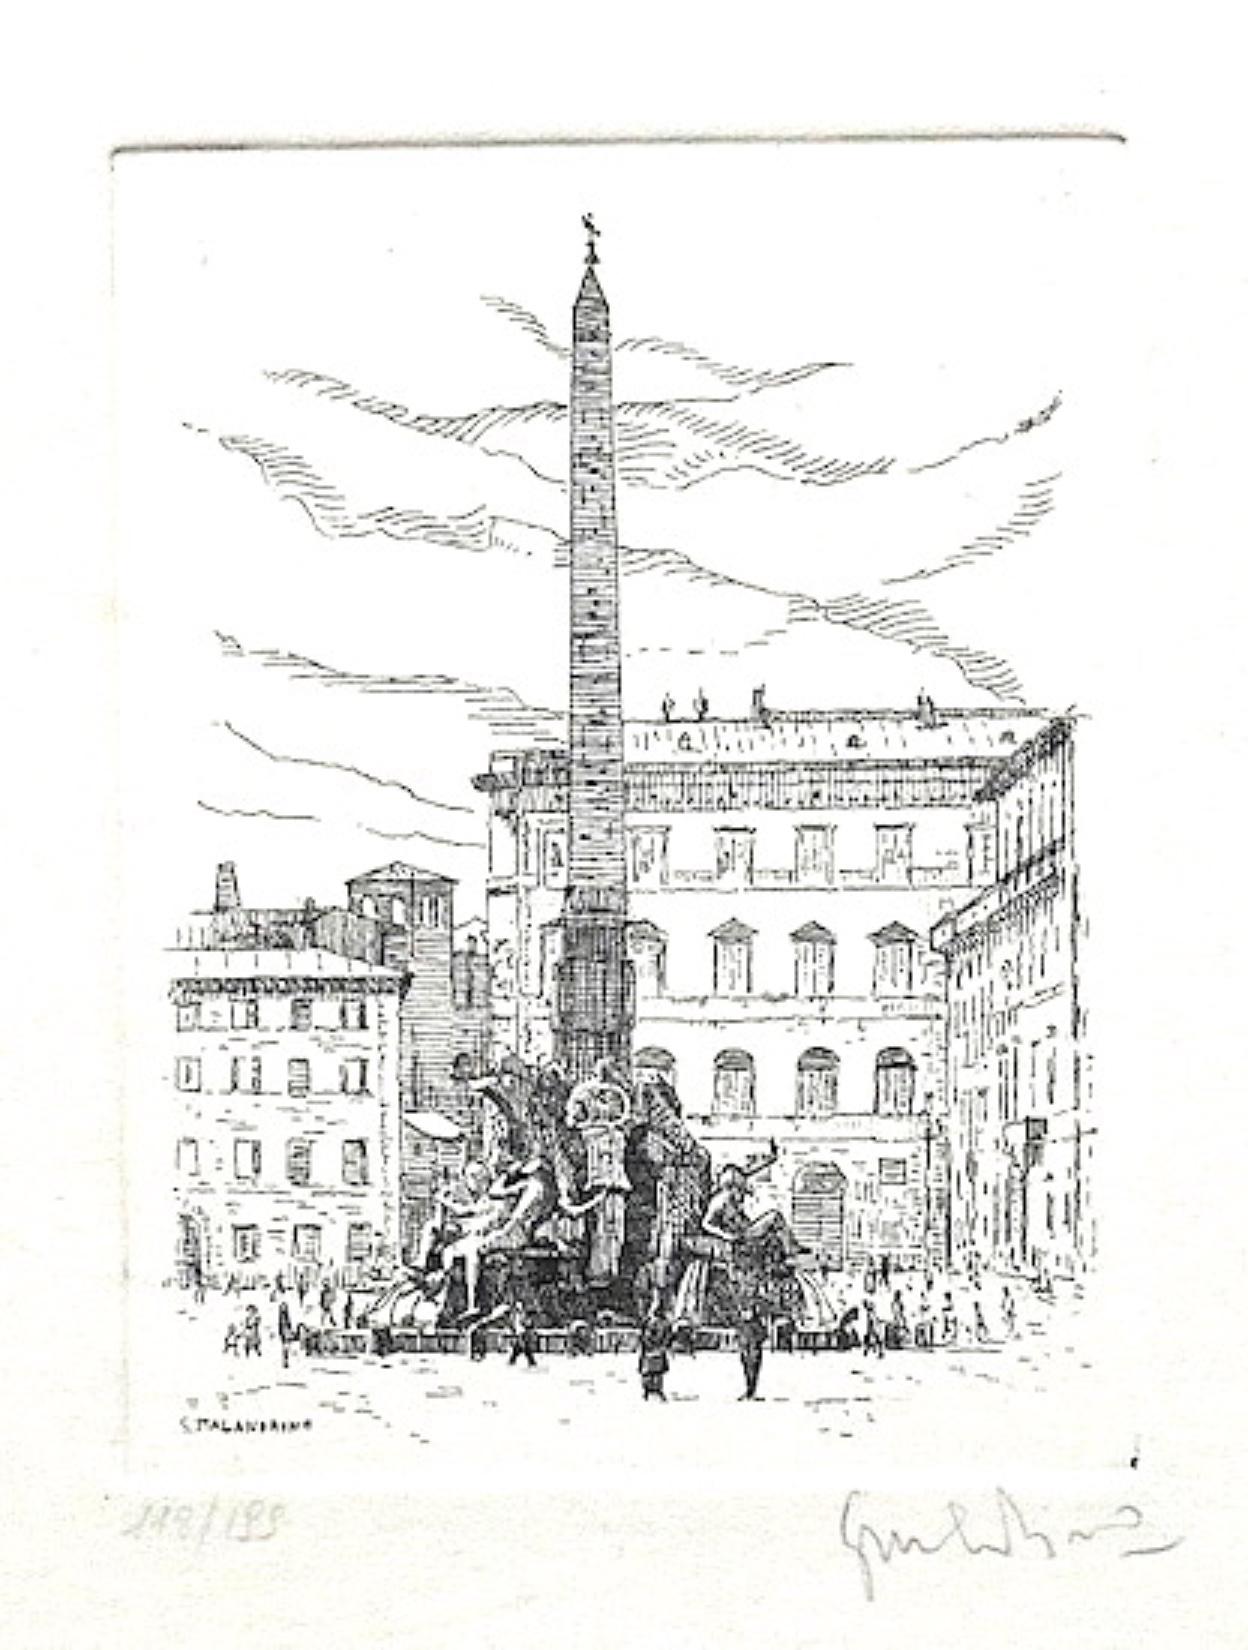 Navona Square - Rome is an original artwork realized by Giuseppe Malandrino.

Original print in etching technique.

Hand-signed by the artist in pencil on the lower right corner. Numbered on the lower-left corner. Edition 148/199.

Image Dimensions: